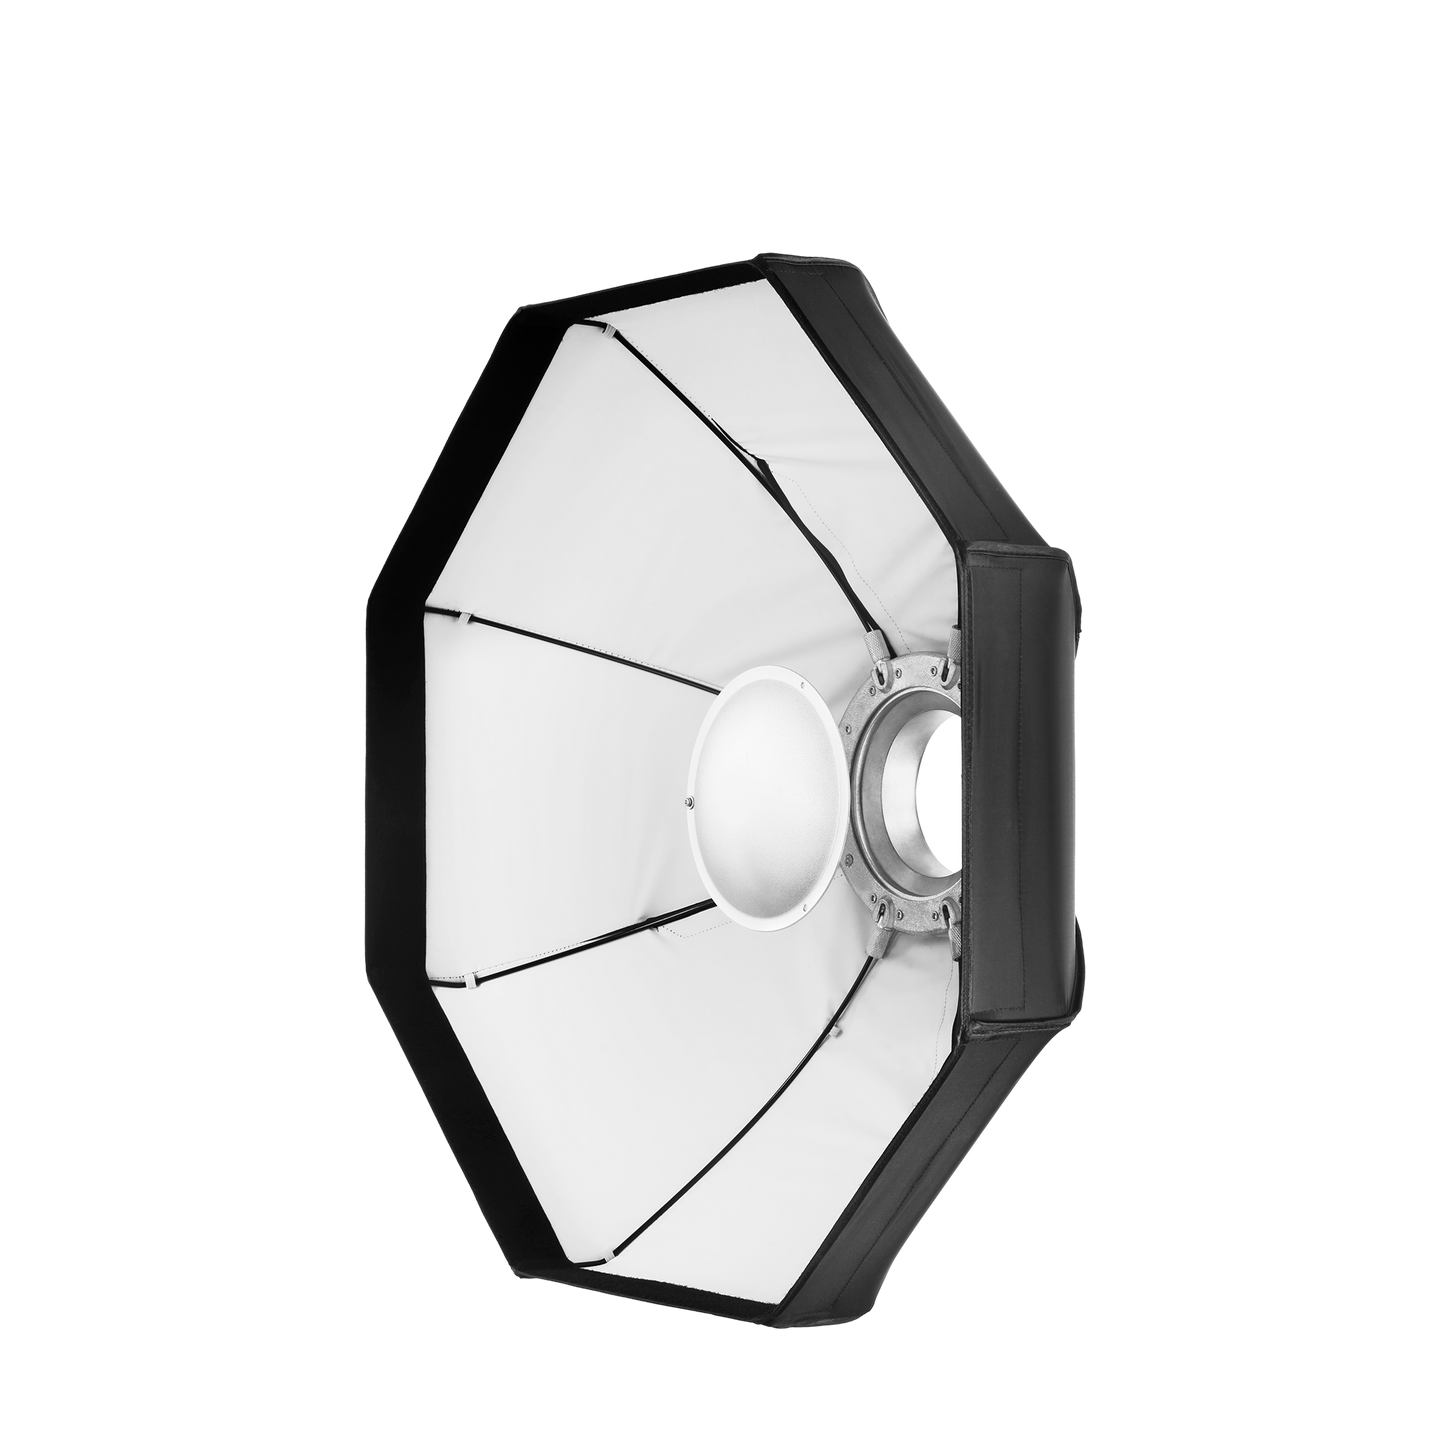 Beauty Dish 80 cm foldable with Bowens connection